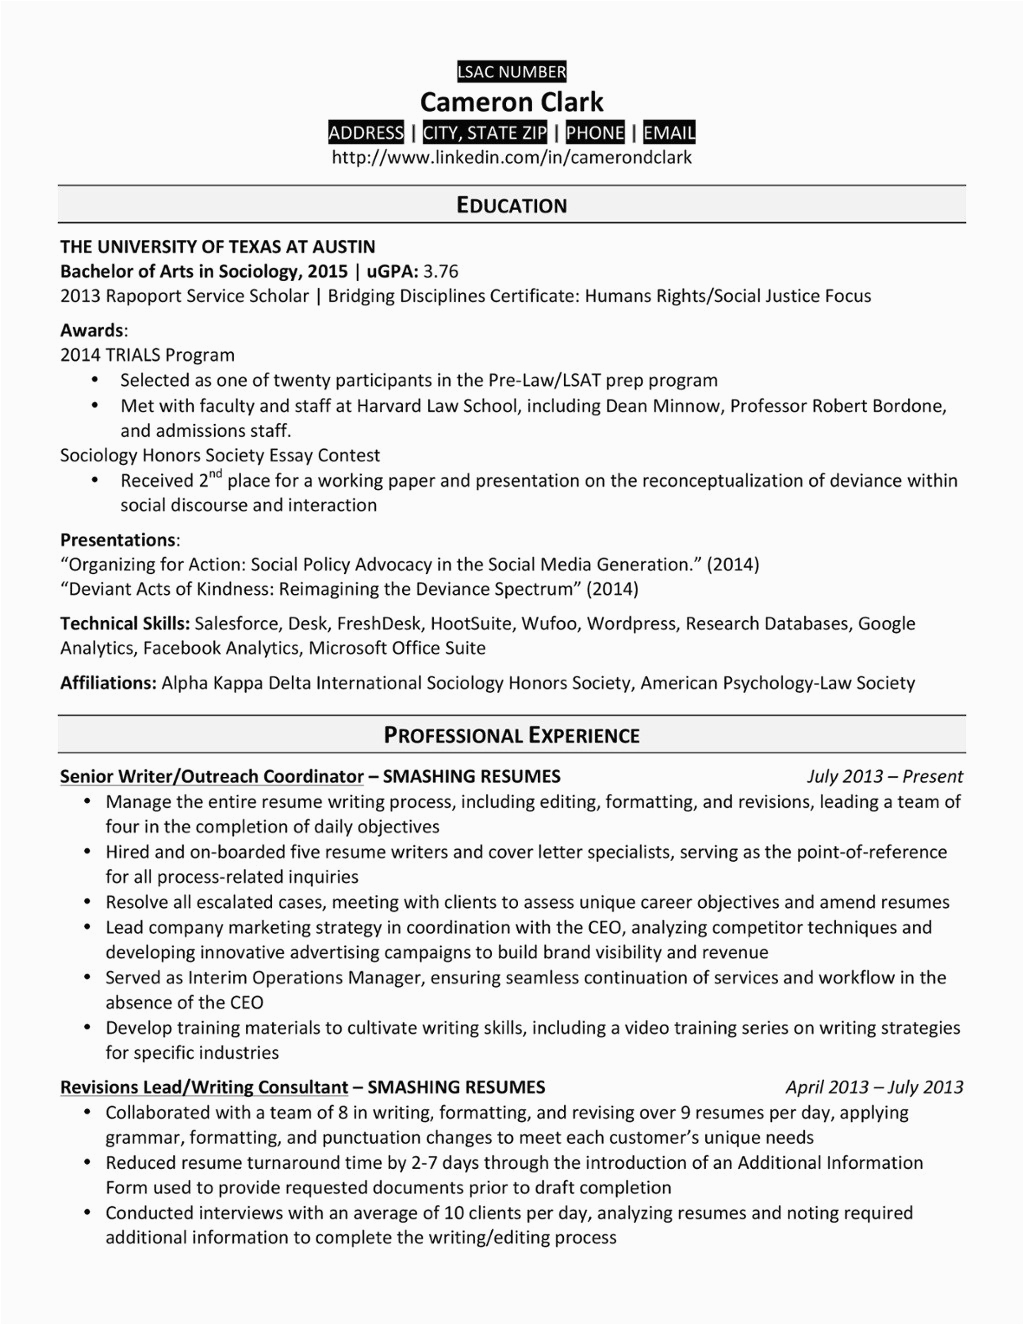 Legal Resume Samples for Law Students Law Student Resume Objective